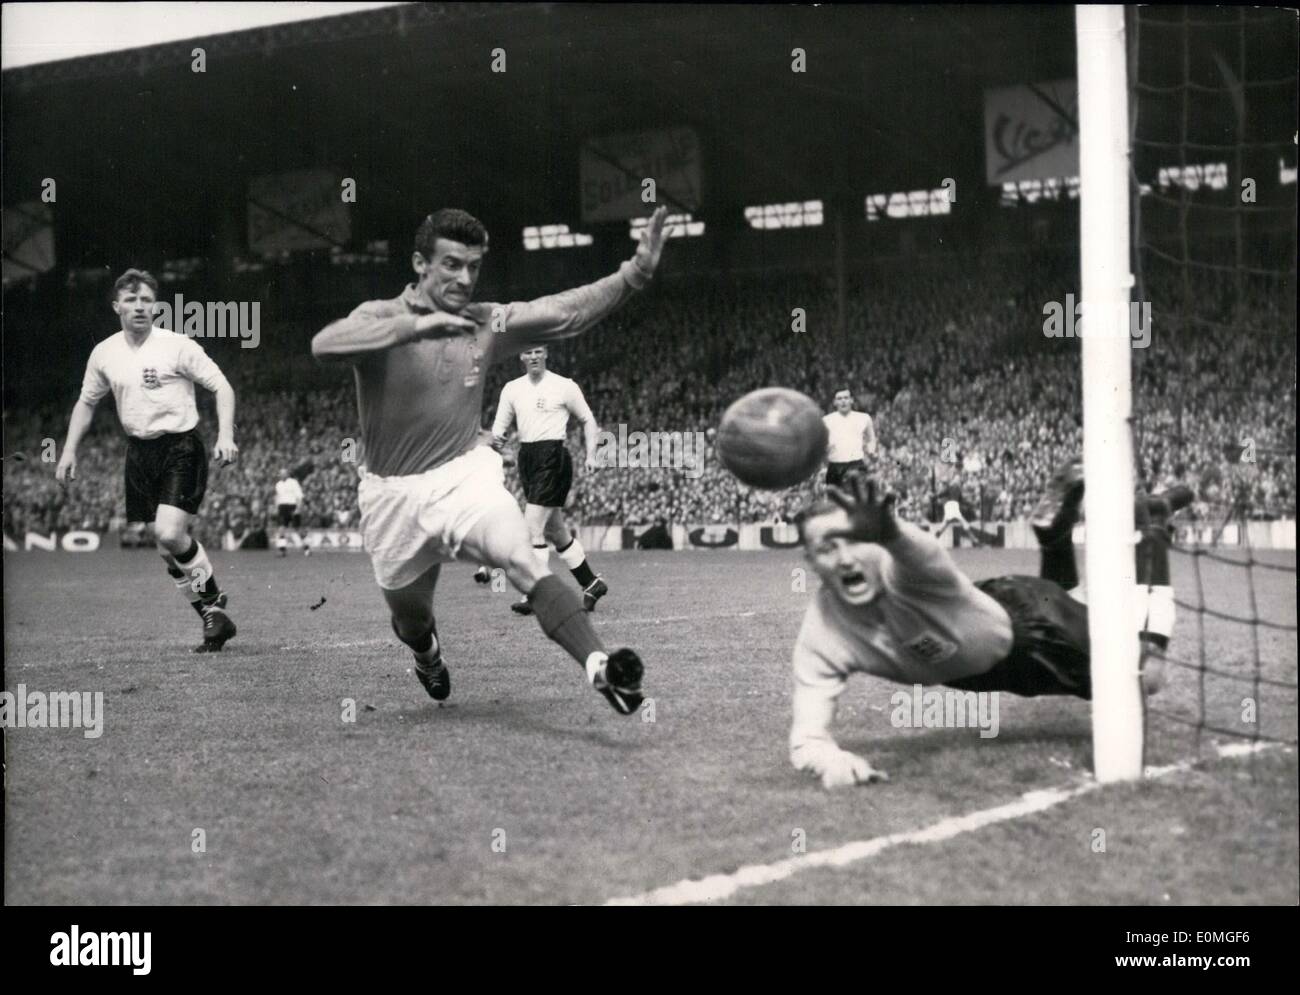 May 05, 1955 - France Beats England By 1 To 0 At Colombes: French Forward Blard shoots. The English goal-keeper Williams stops Stock Photo